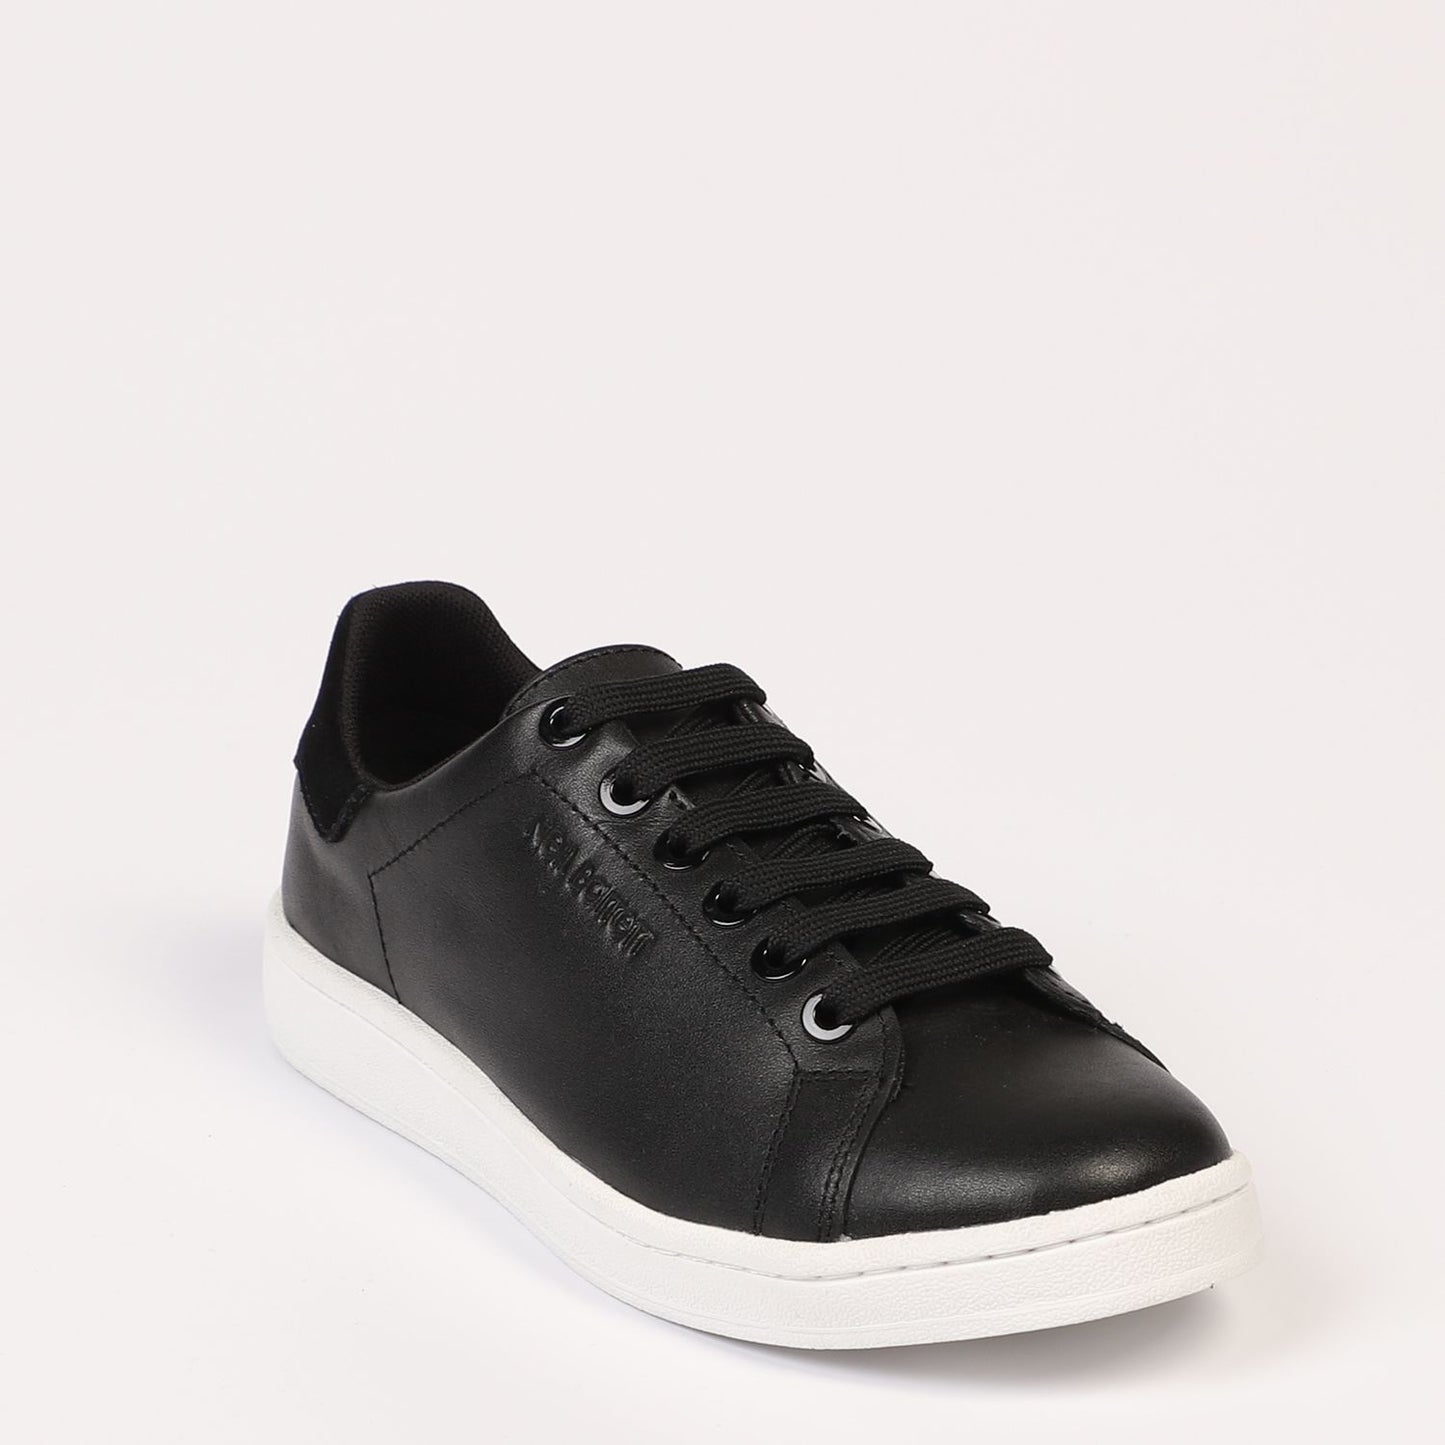 Chic Black Tennis Trainers with Lace Closure